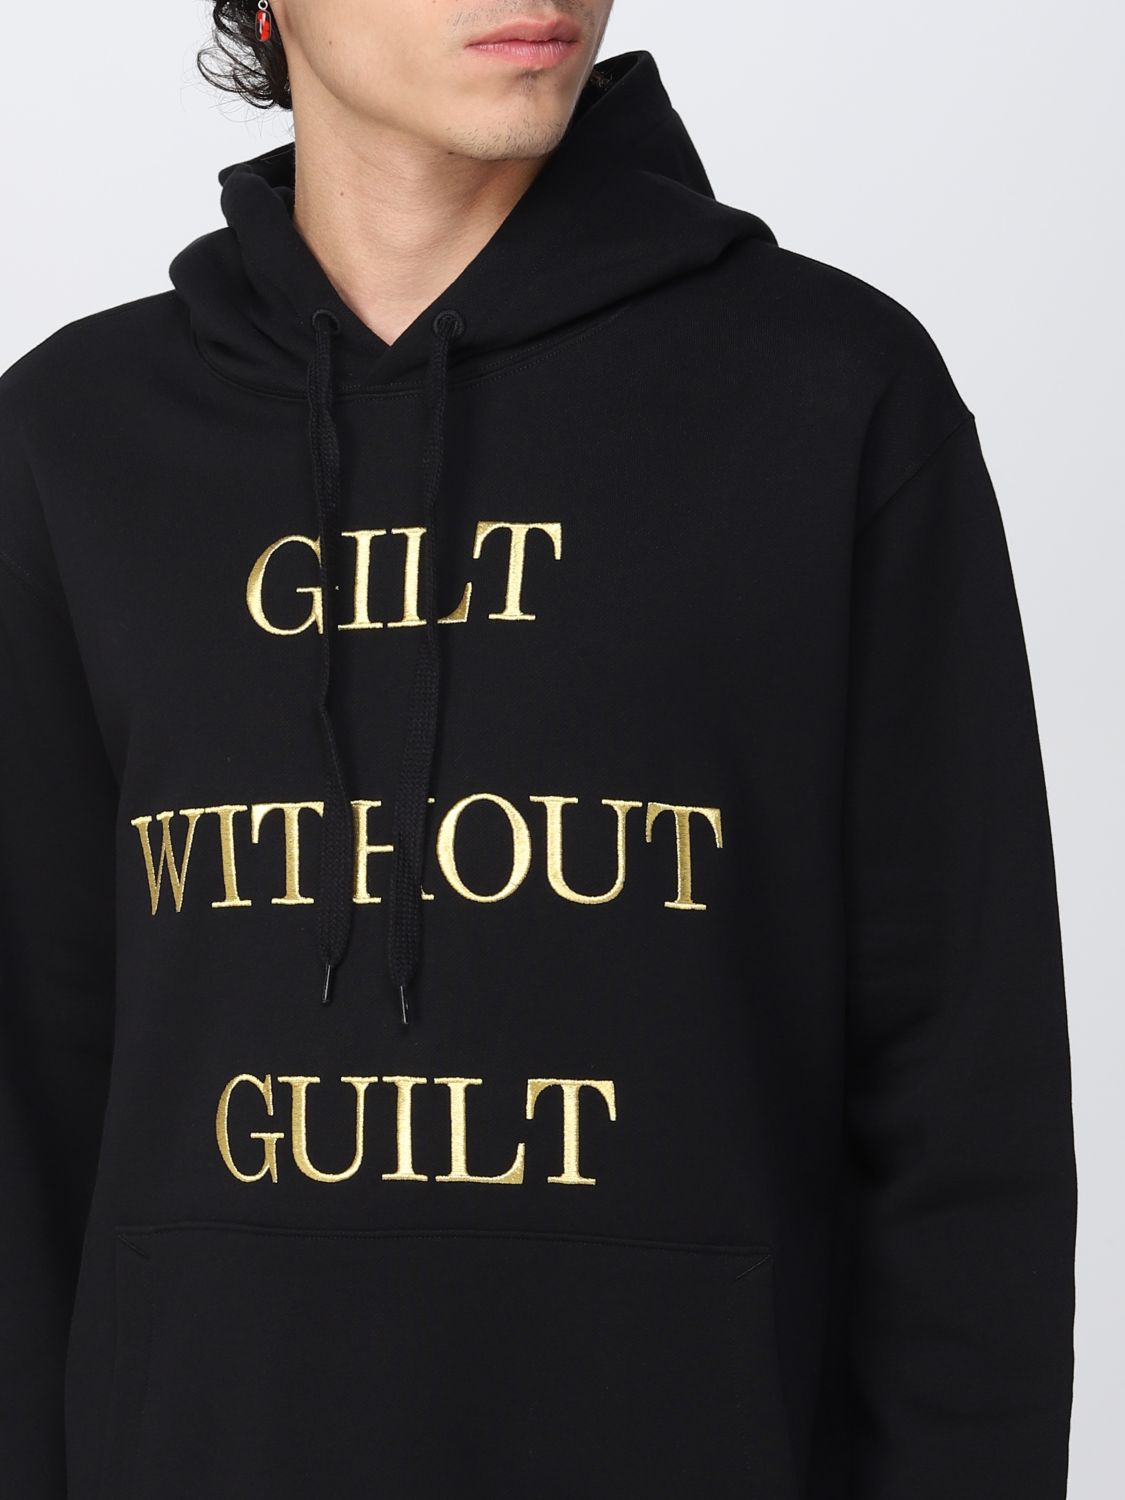 MOSCHINO COUTURE: Gilt Without Guilt sweatshirt - Black | Moschino Couture  sweatshirt 17887228 online on 